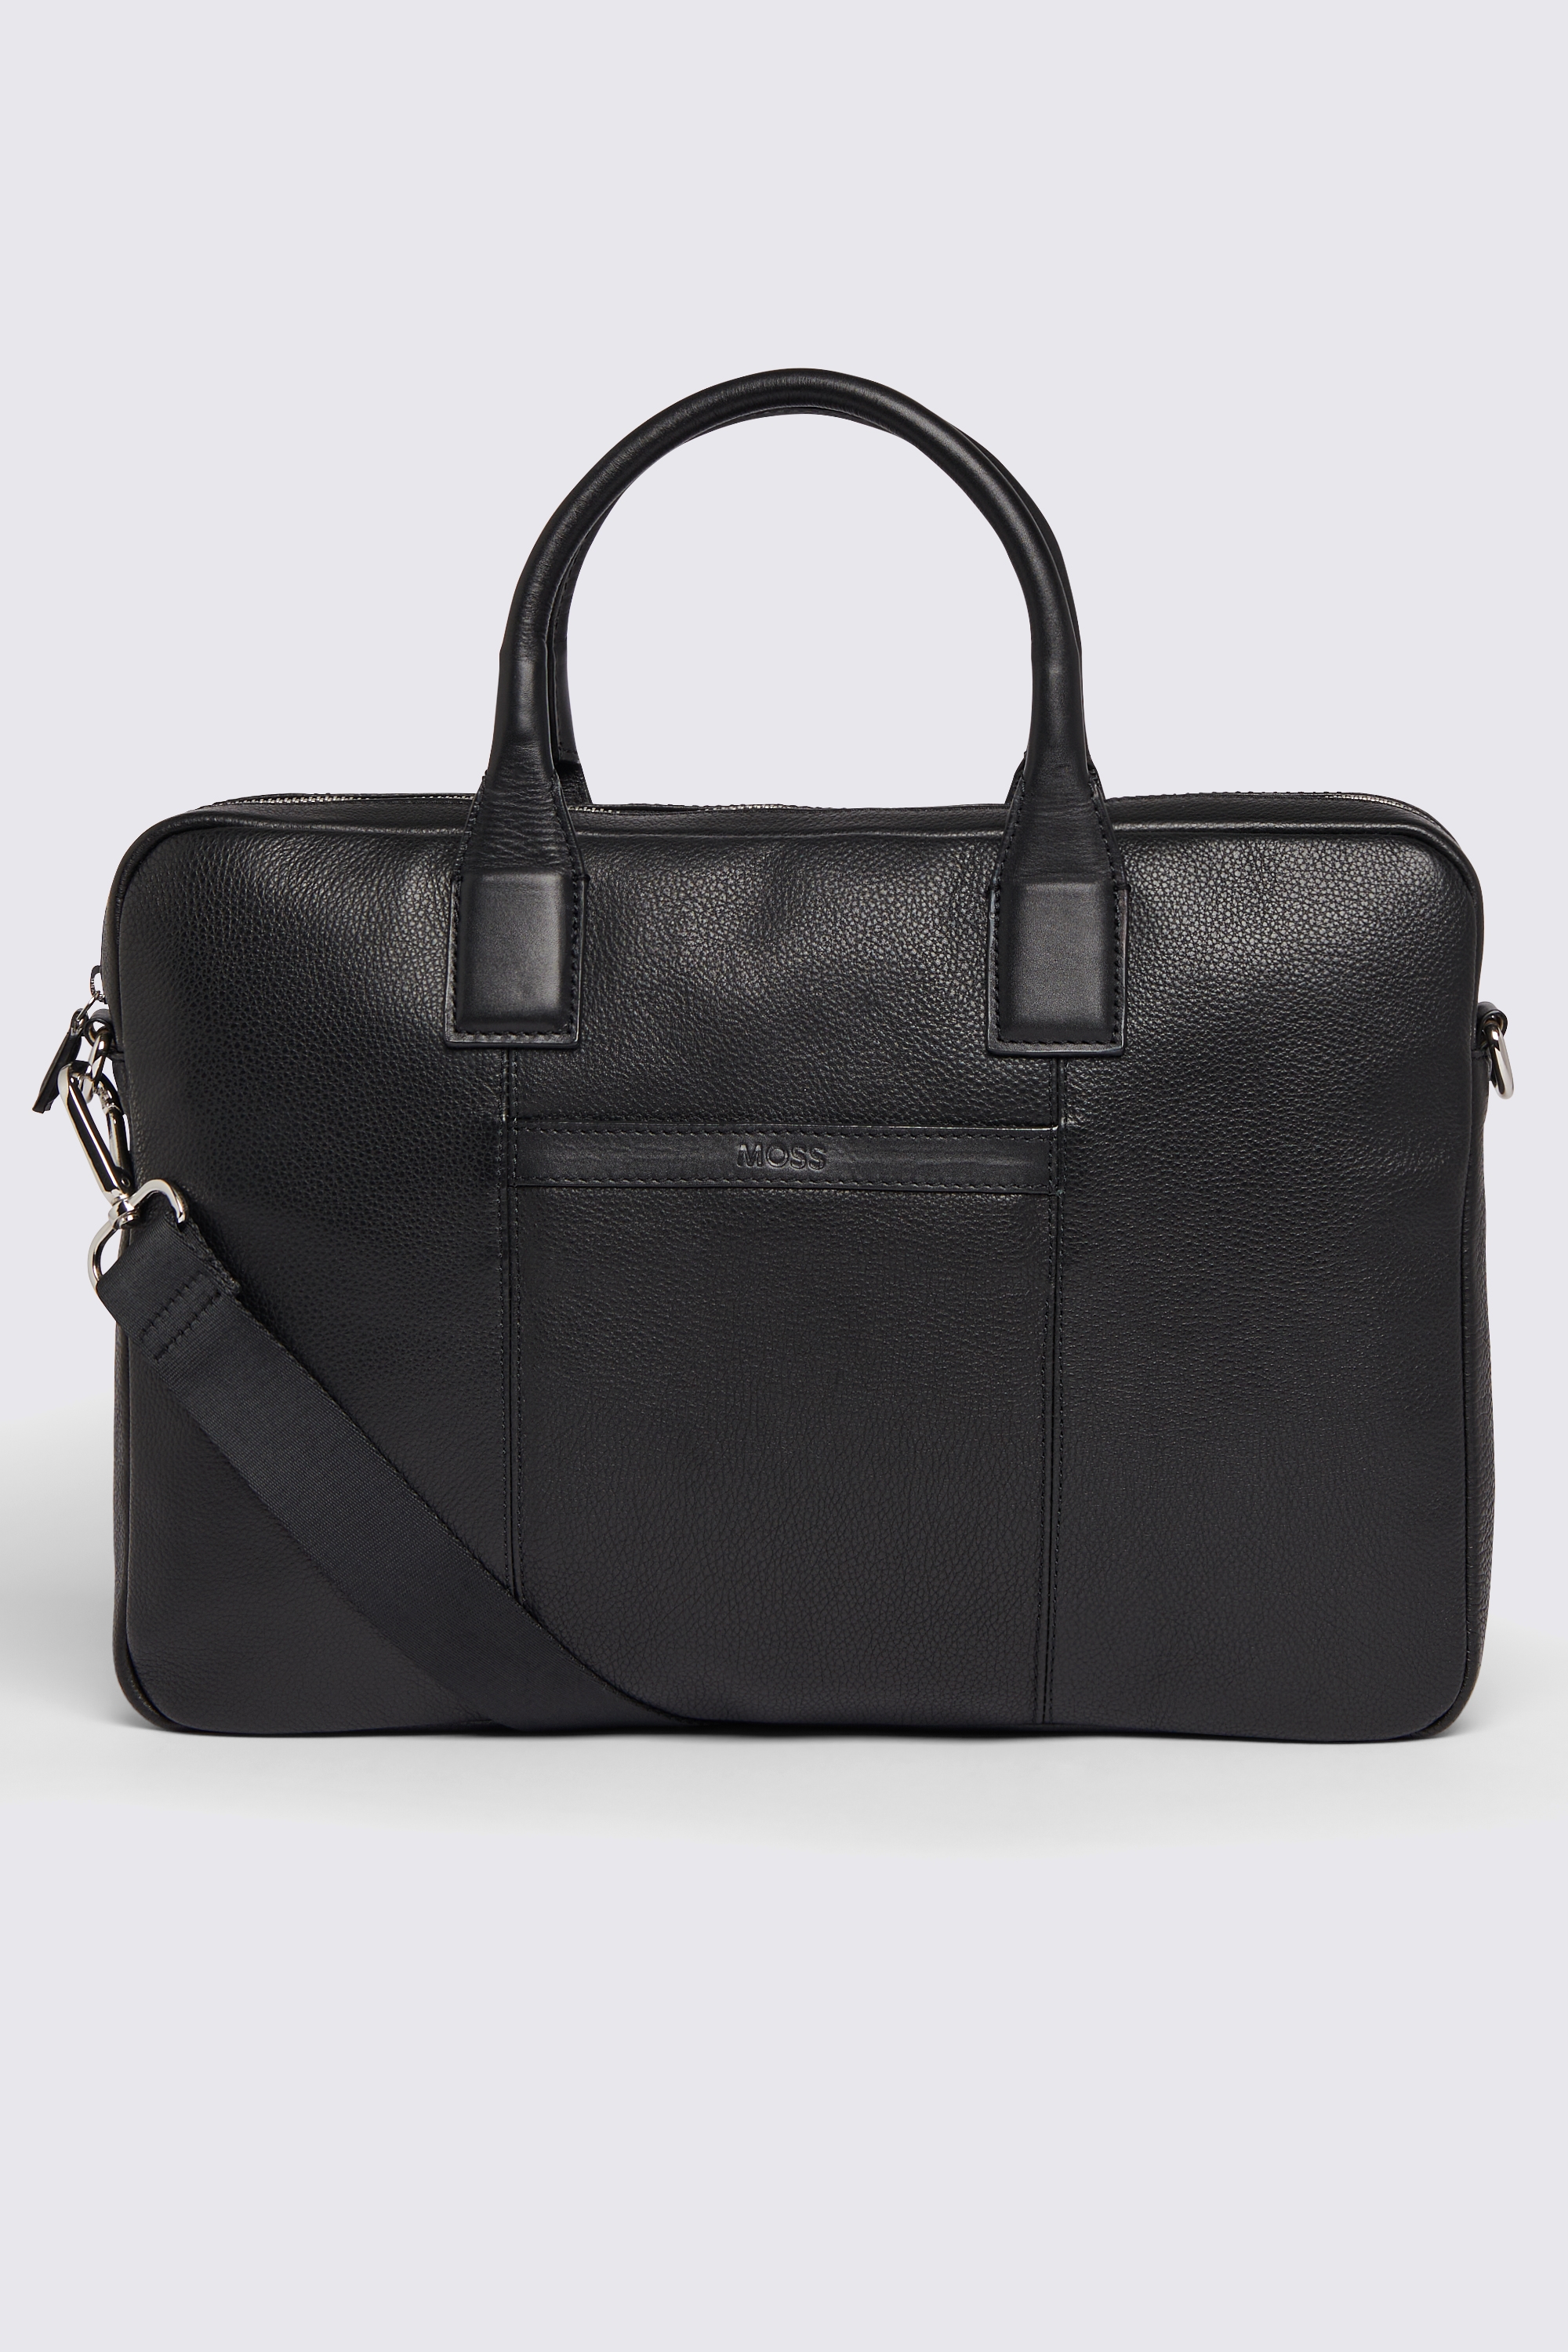 Black Grained Leather Briefcase | Buy Online at Moss